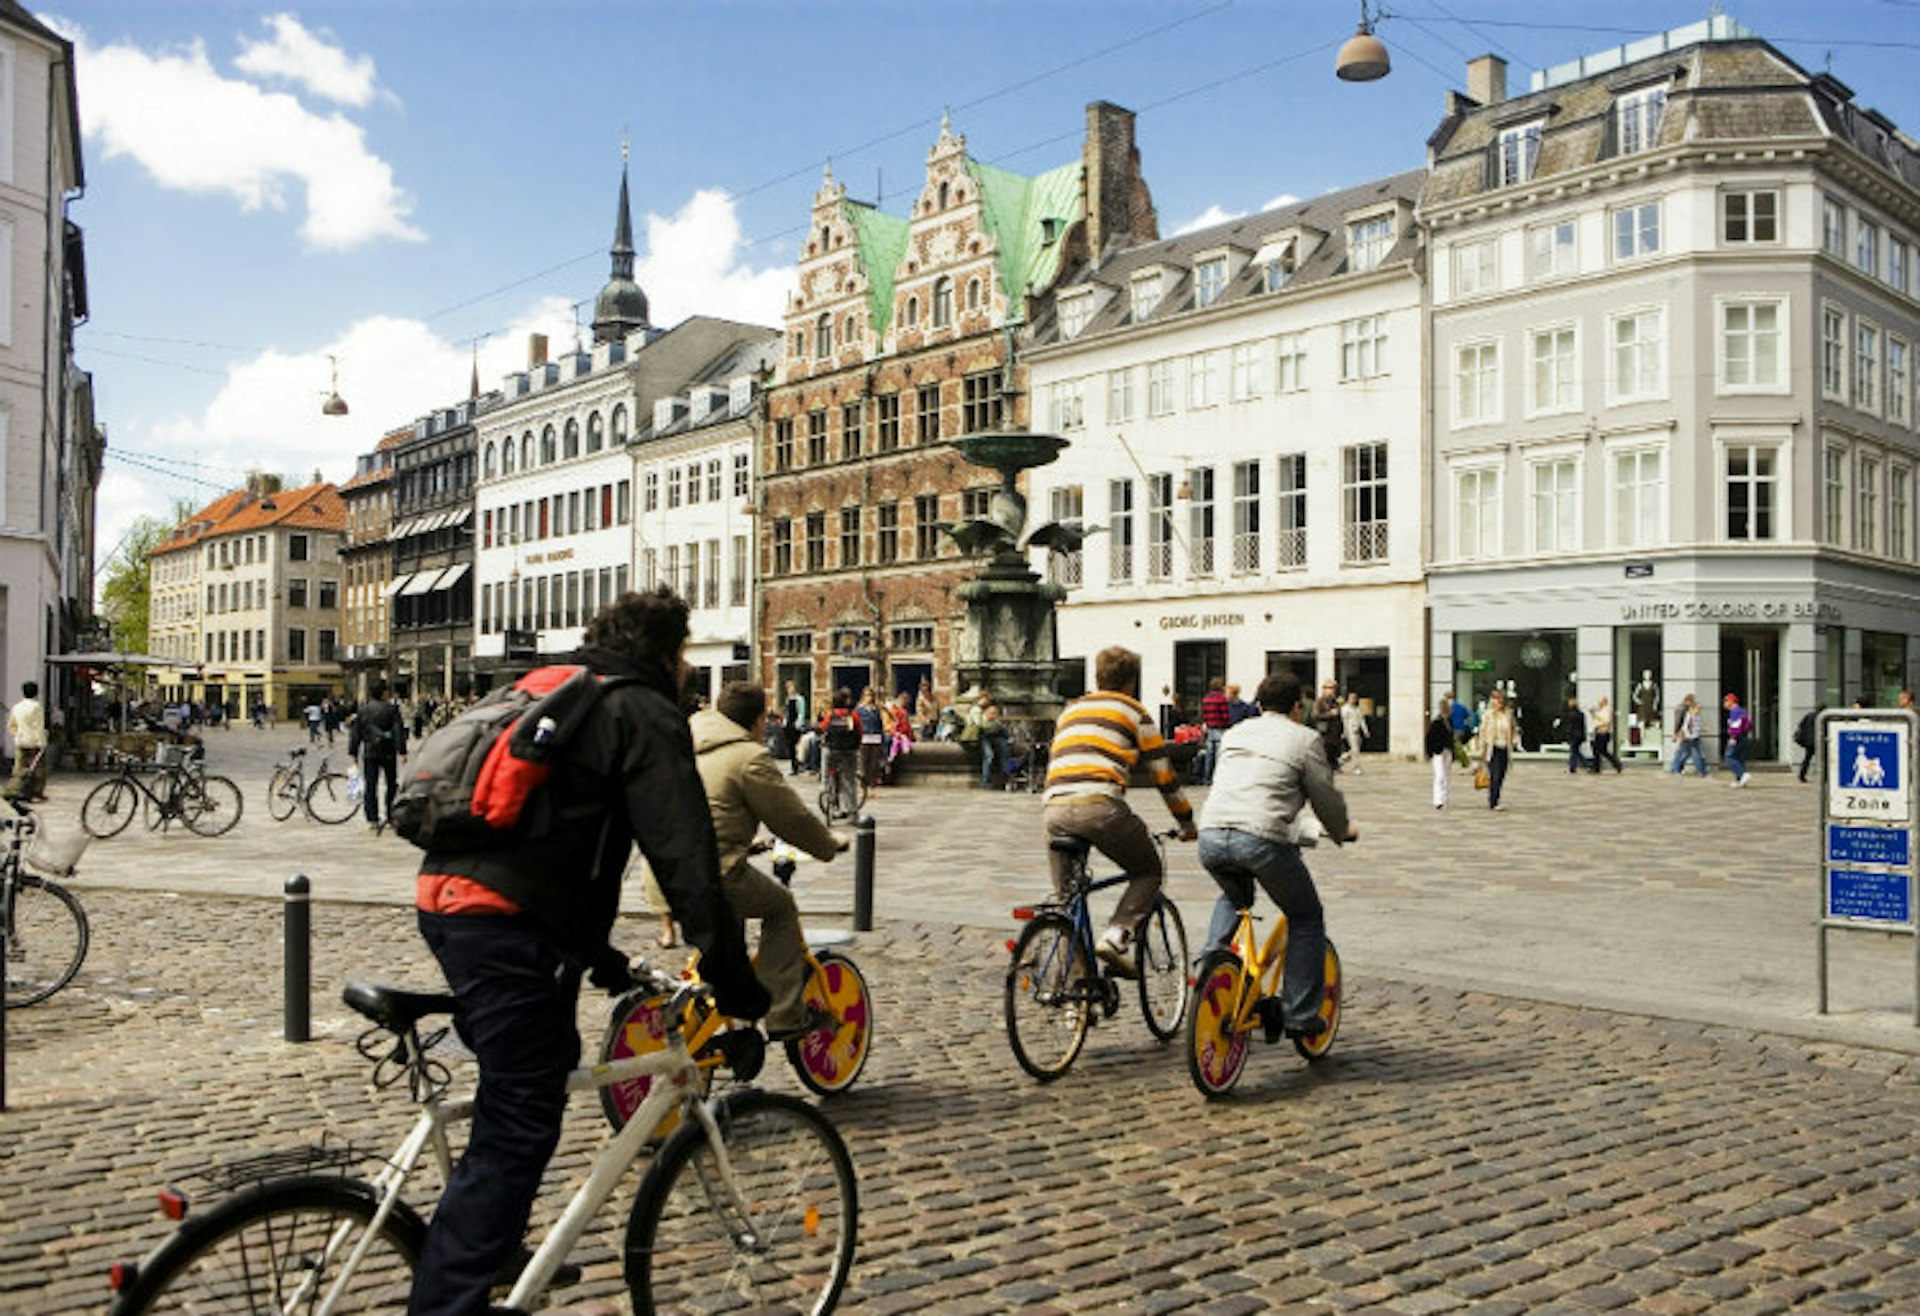 Copenhagen is incredibly bike-friendly. Image by Dag Sundberg / Photographer's choice / Getty Images